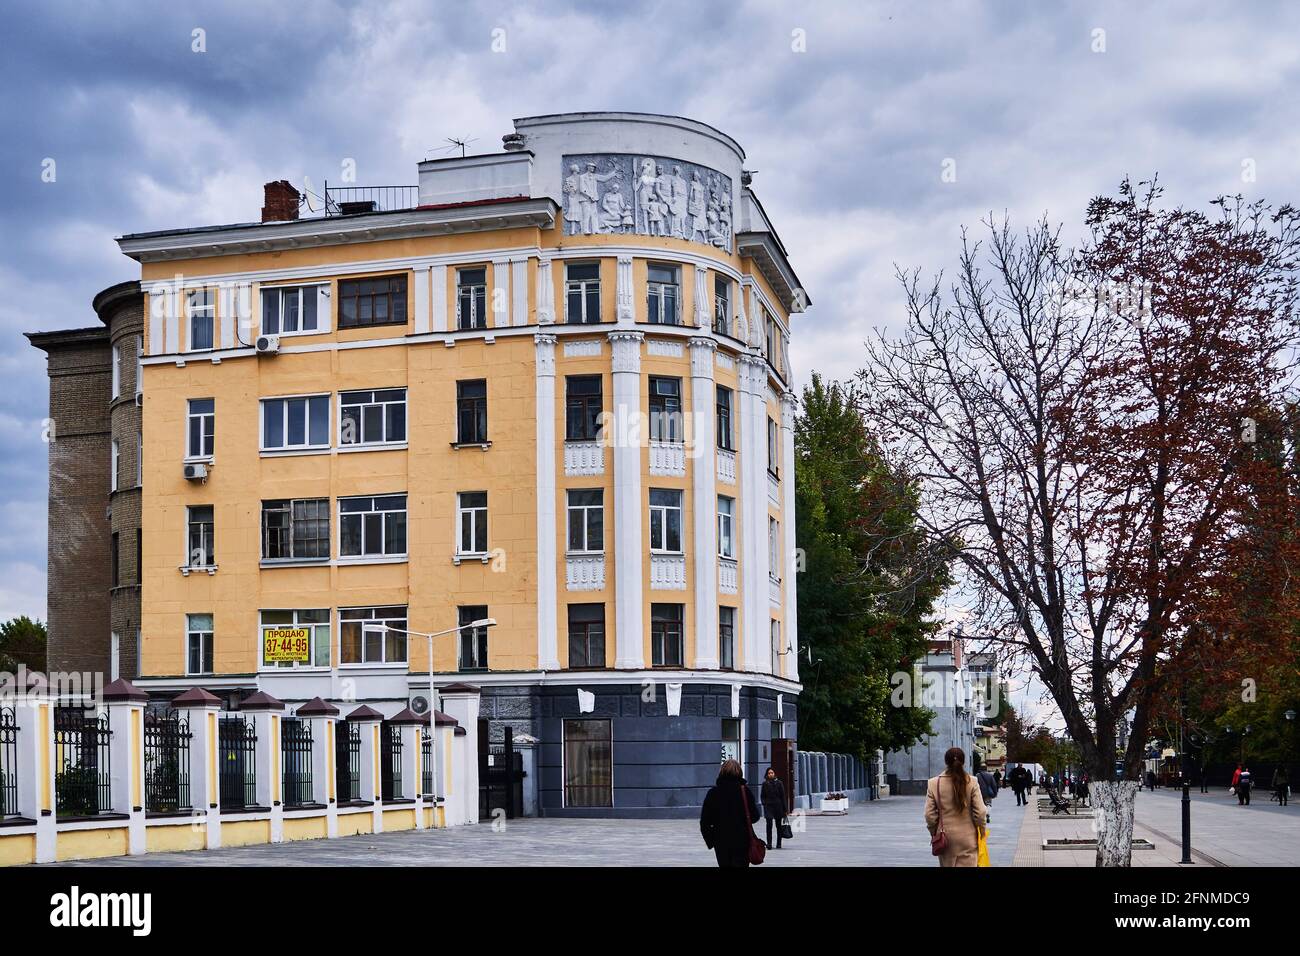 Russia ;Saratov Oblast.Saratov city  Saratov has probably the most elegant and beautiful buildings in the pedestrian Volzhskaya Street. This mansion w Stock Photo